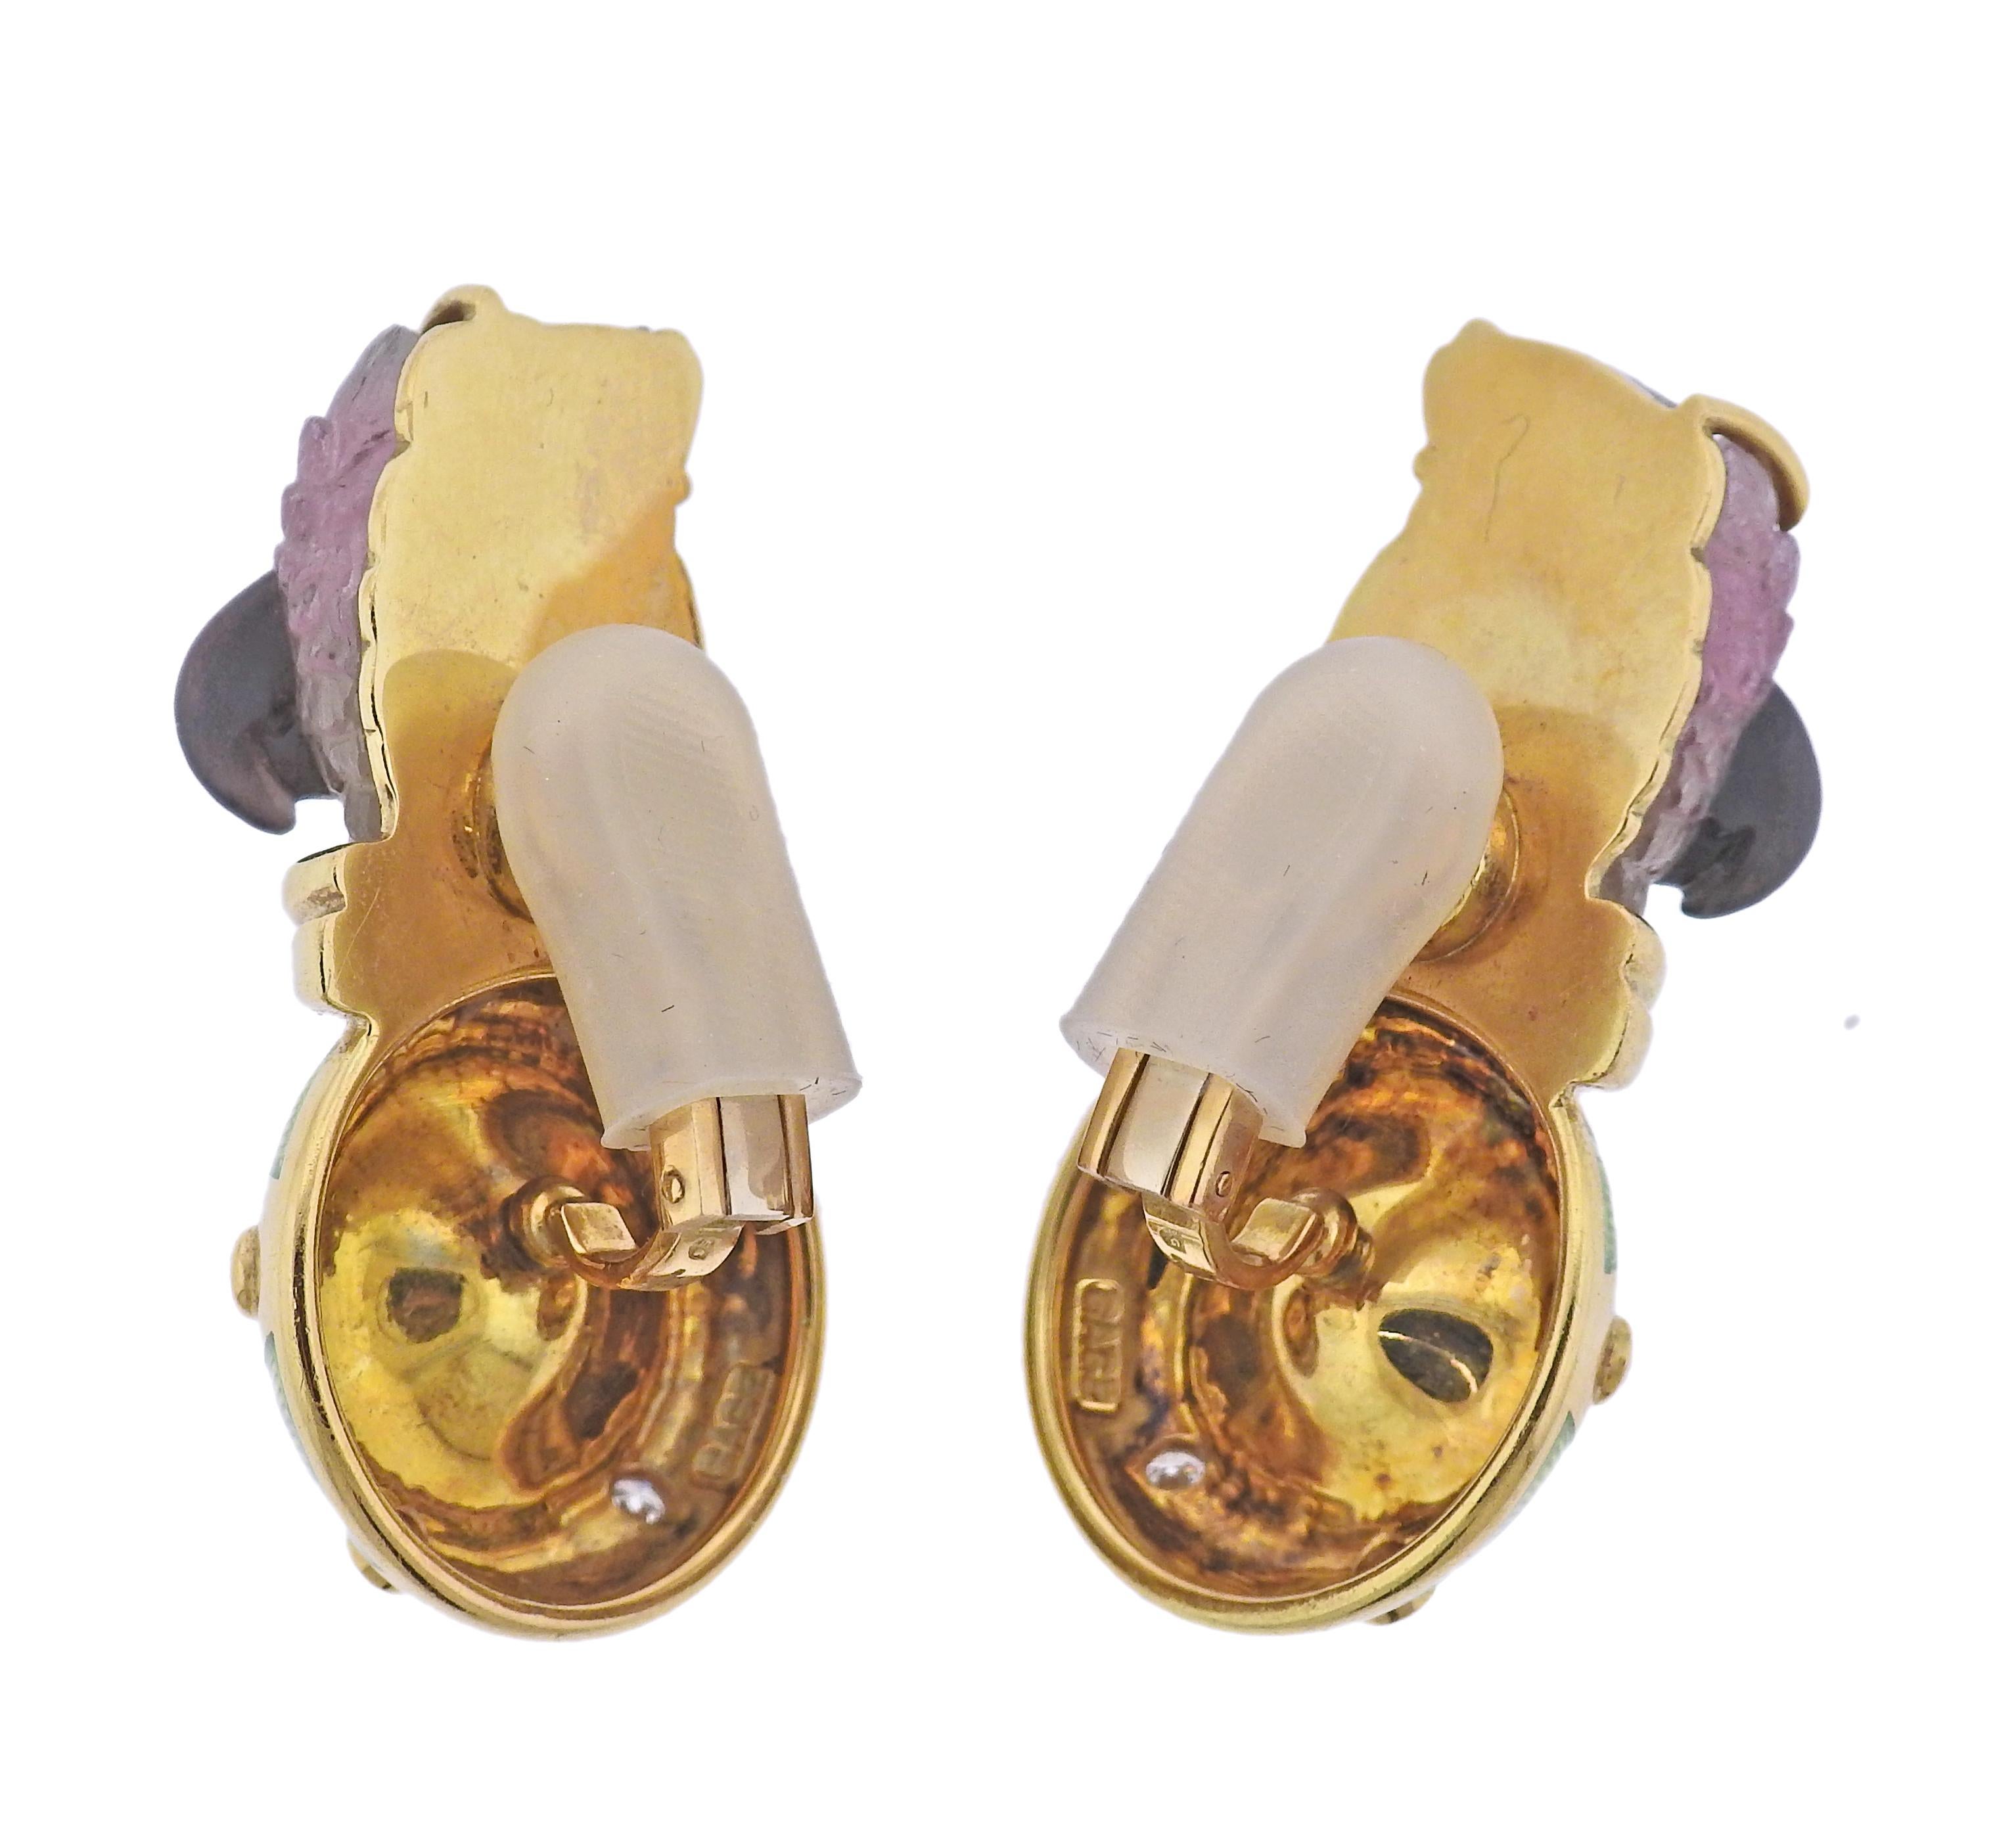 Pair of 18k gold earrings by Elizabeth Gage, featuring carved tourmaline parrot heads, approx. 0.20ctw G/VS diamonds and 11.8mm pearls.  Earrings are 43mm x 24mm. Marked: Gage, English marks.  Weight - 47.1 grams.